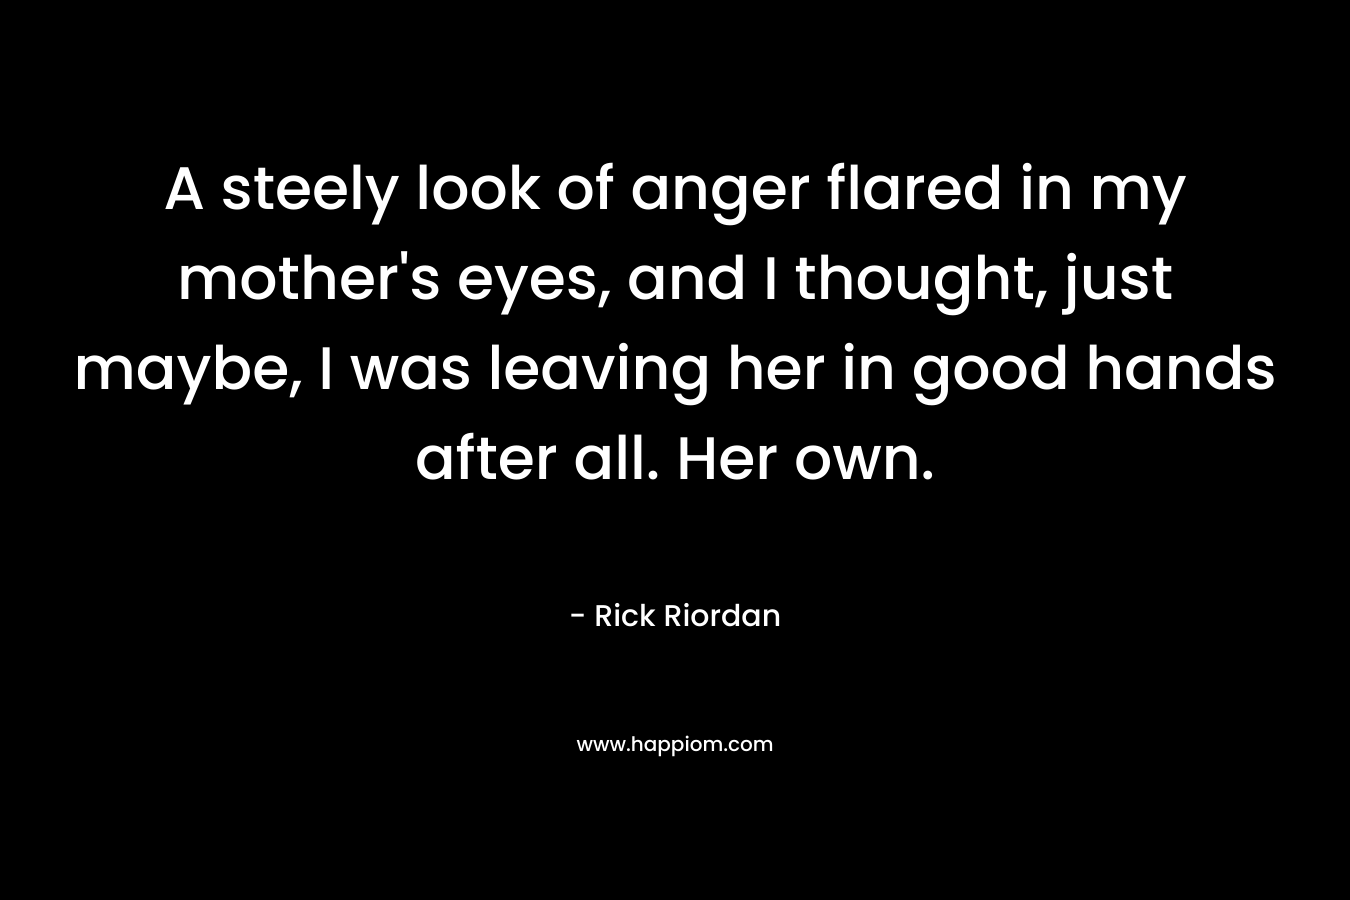 A steely look of anger flared in my mother’s eyes, and I thought, just maybe, I was leaving her in good hands after all. Her own. – Rick Riordan